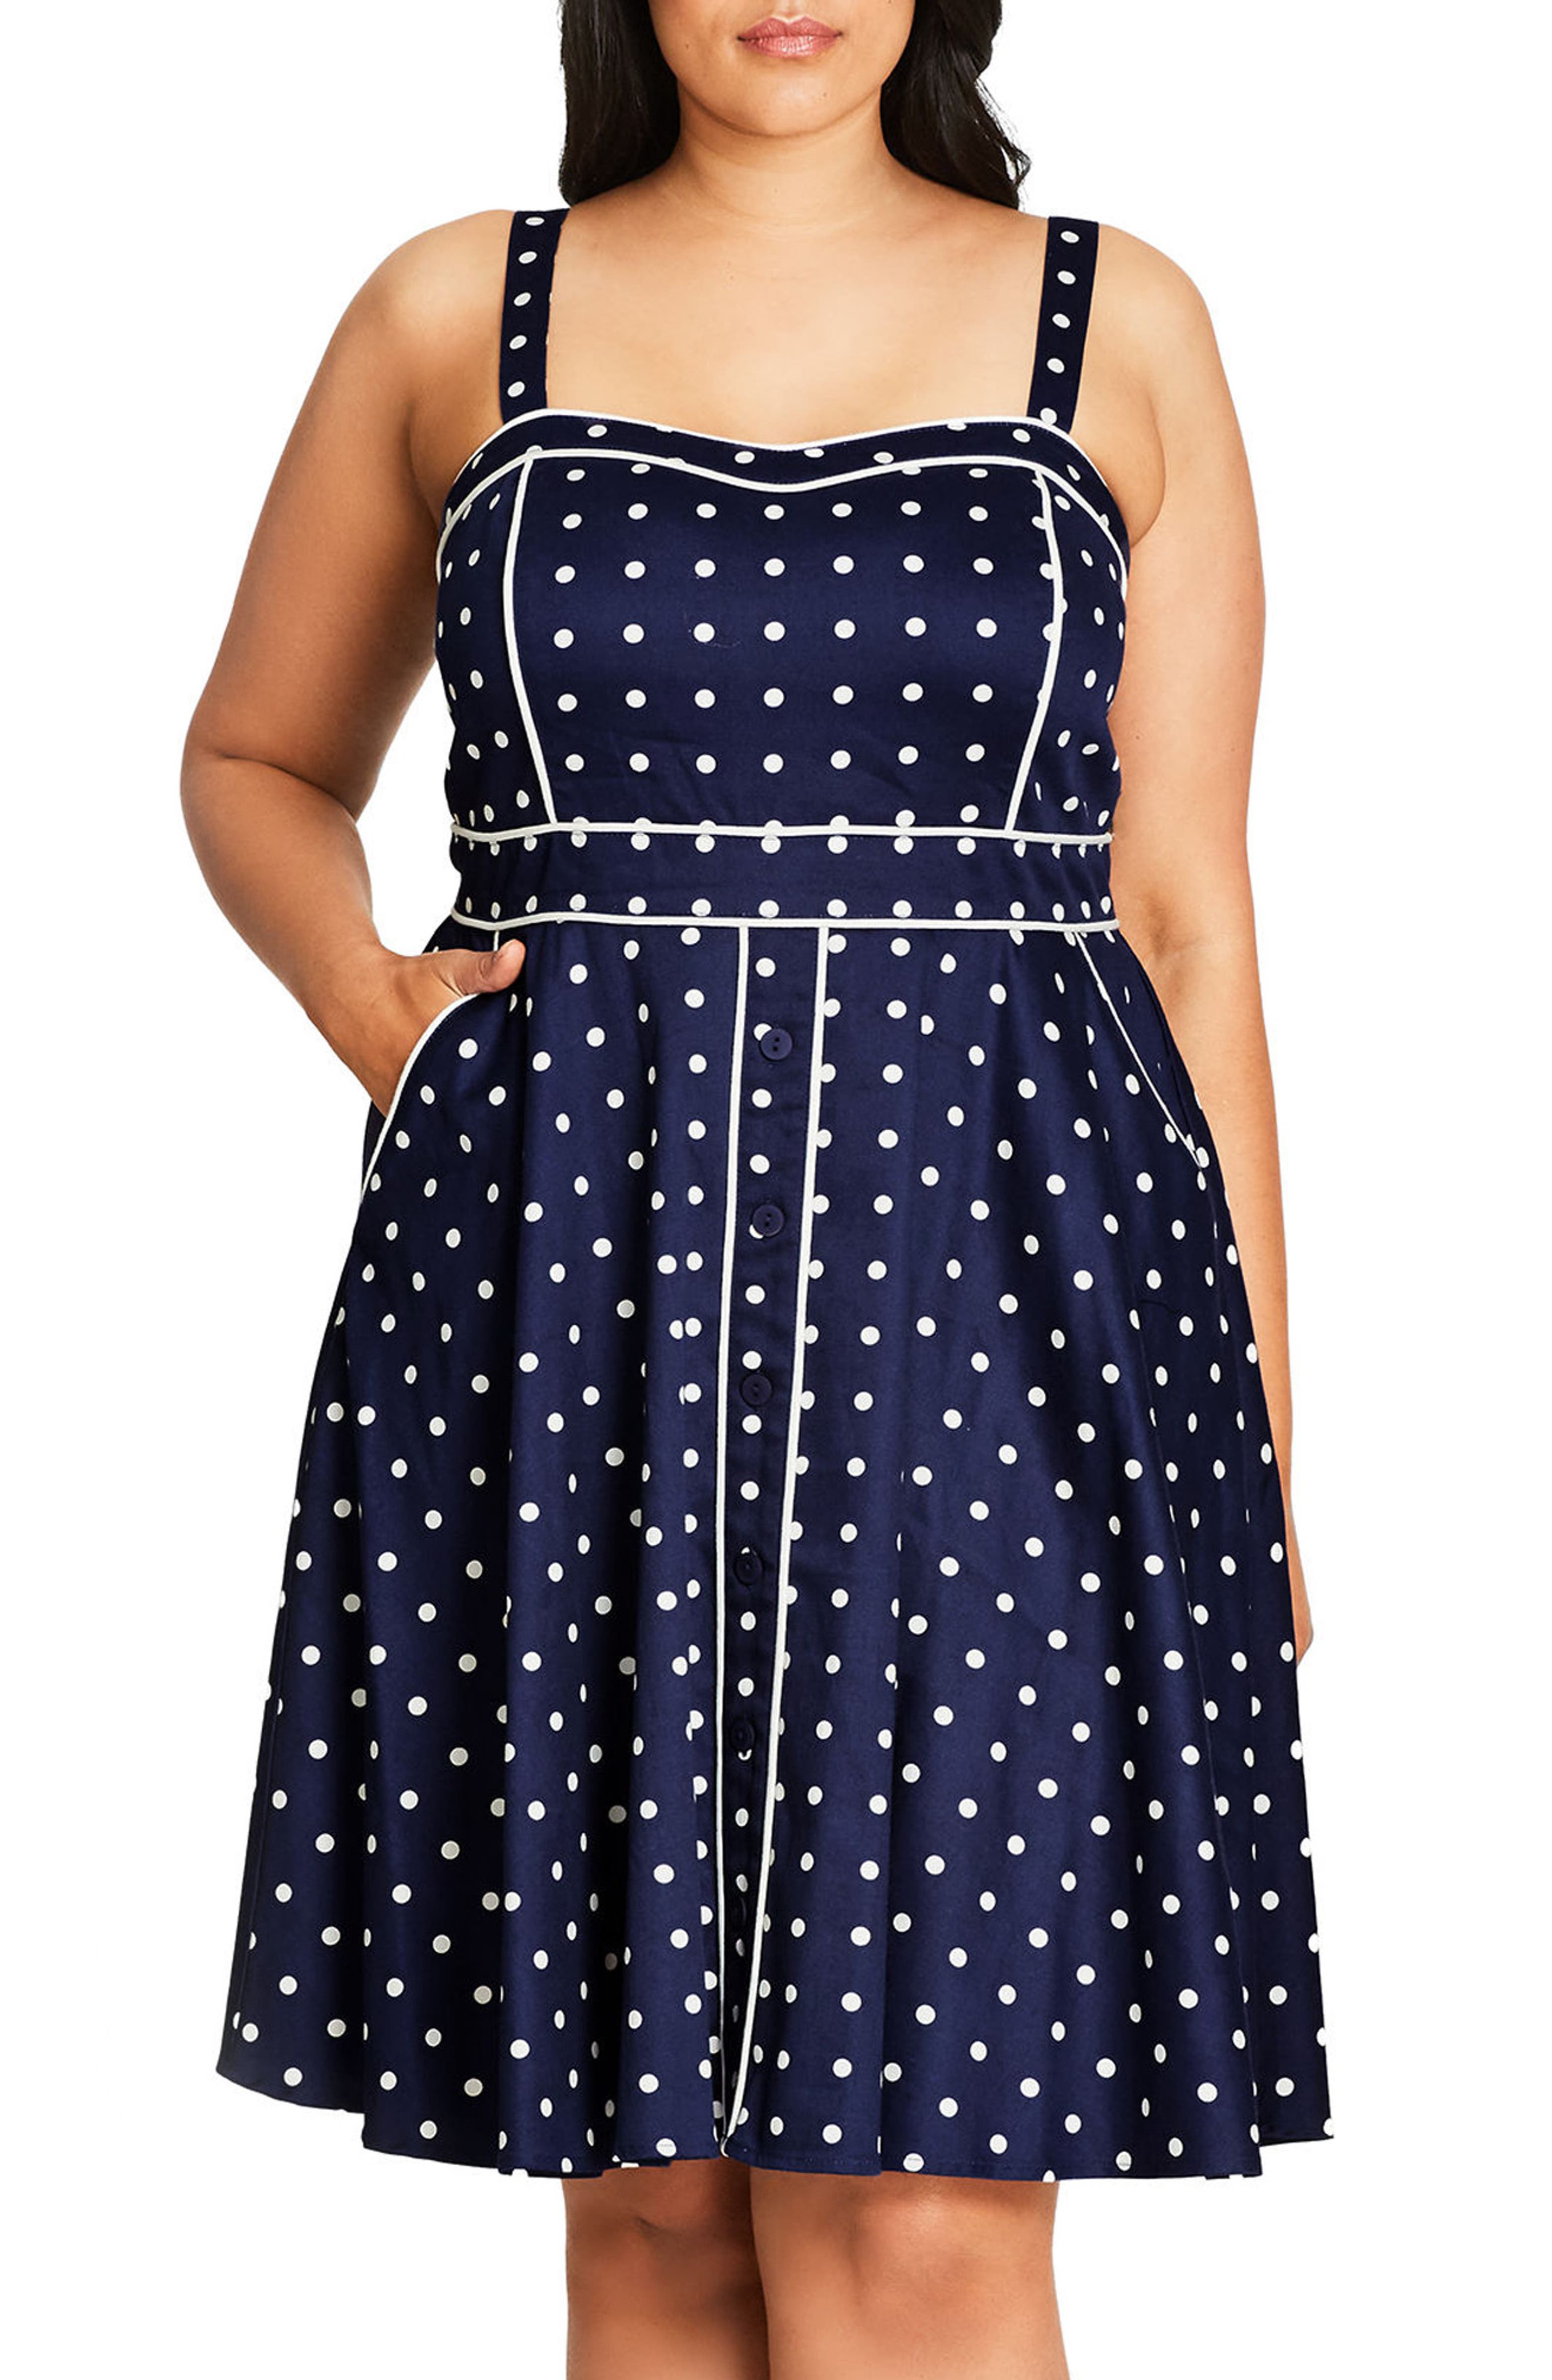 City Chic Sweet Darling Piped Dot Print Fit & Flare Dress | Nordstrom